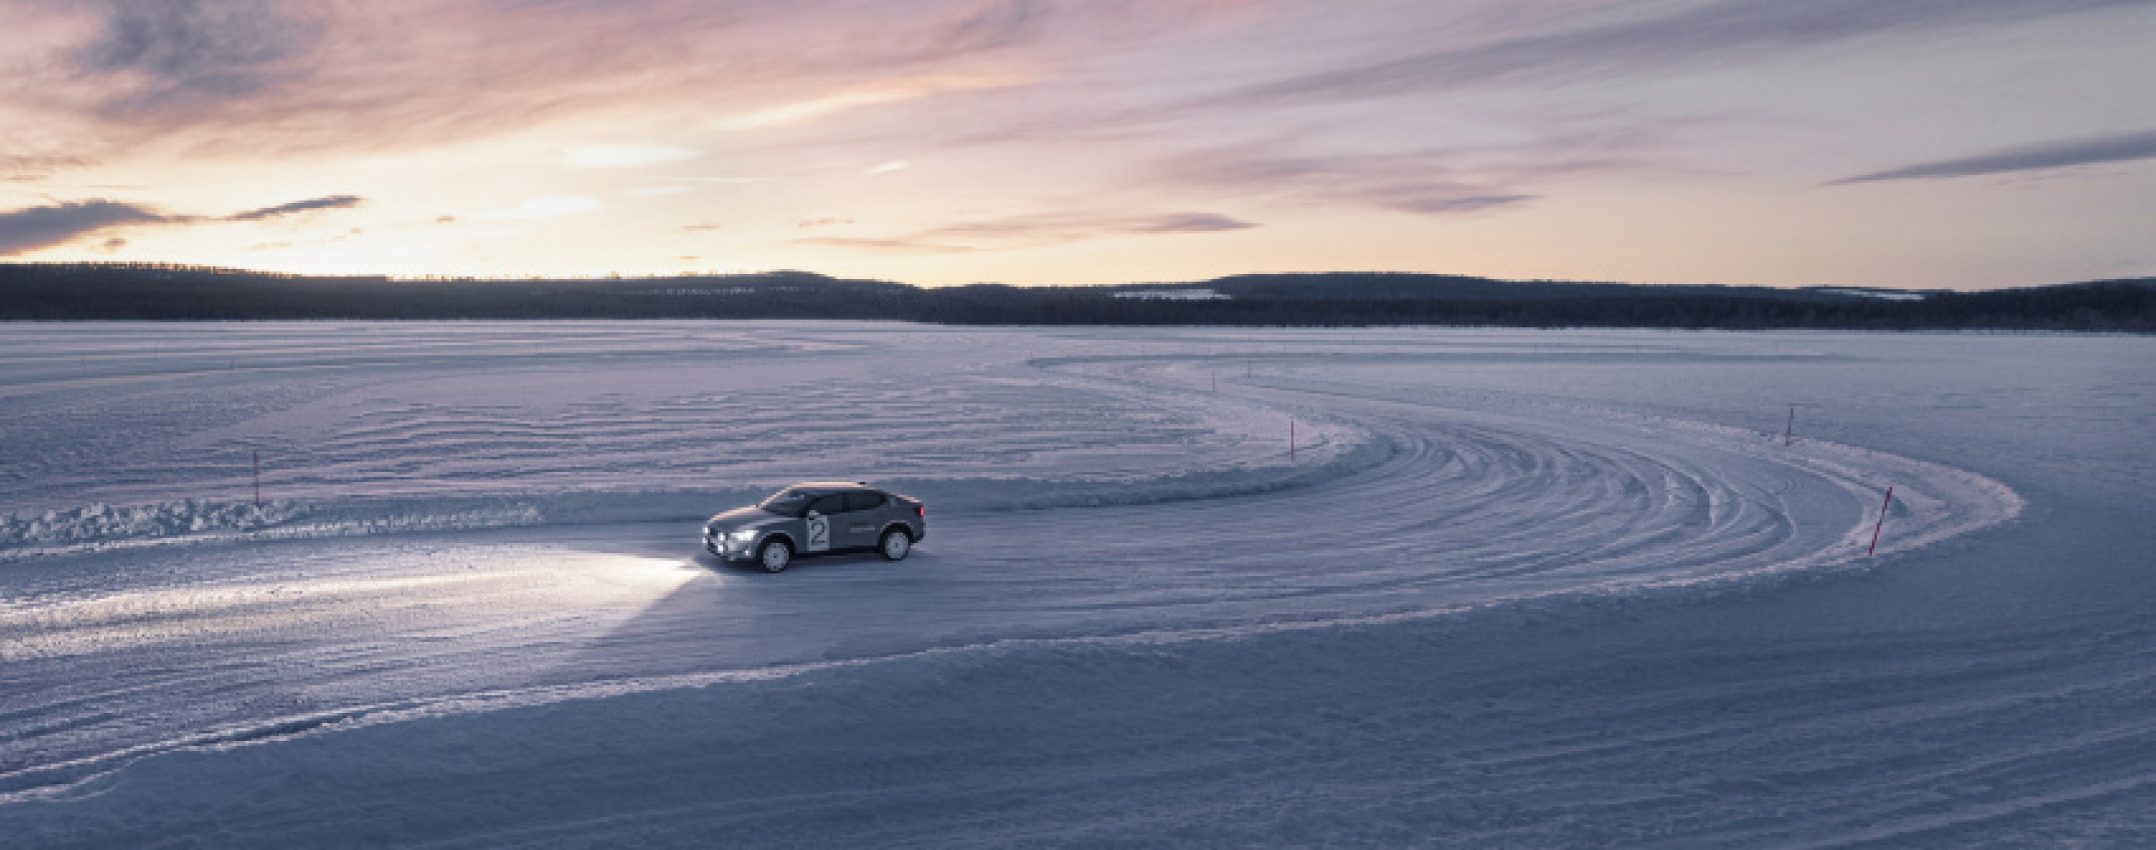 autos, cars, news, polestar, concepts, electric vehicles, polestar 2, polestar concepts, polestar videos, video, polestar 2 “arctic circle” one-off is a winter rally-prepped ev